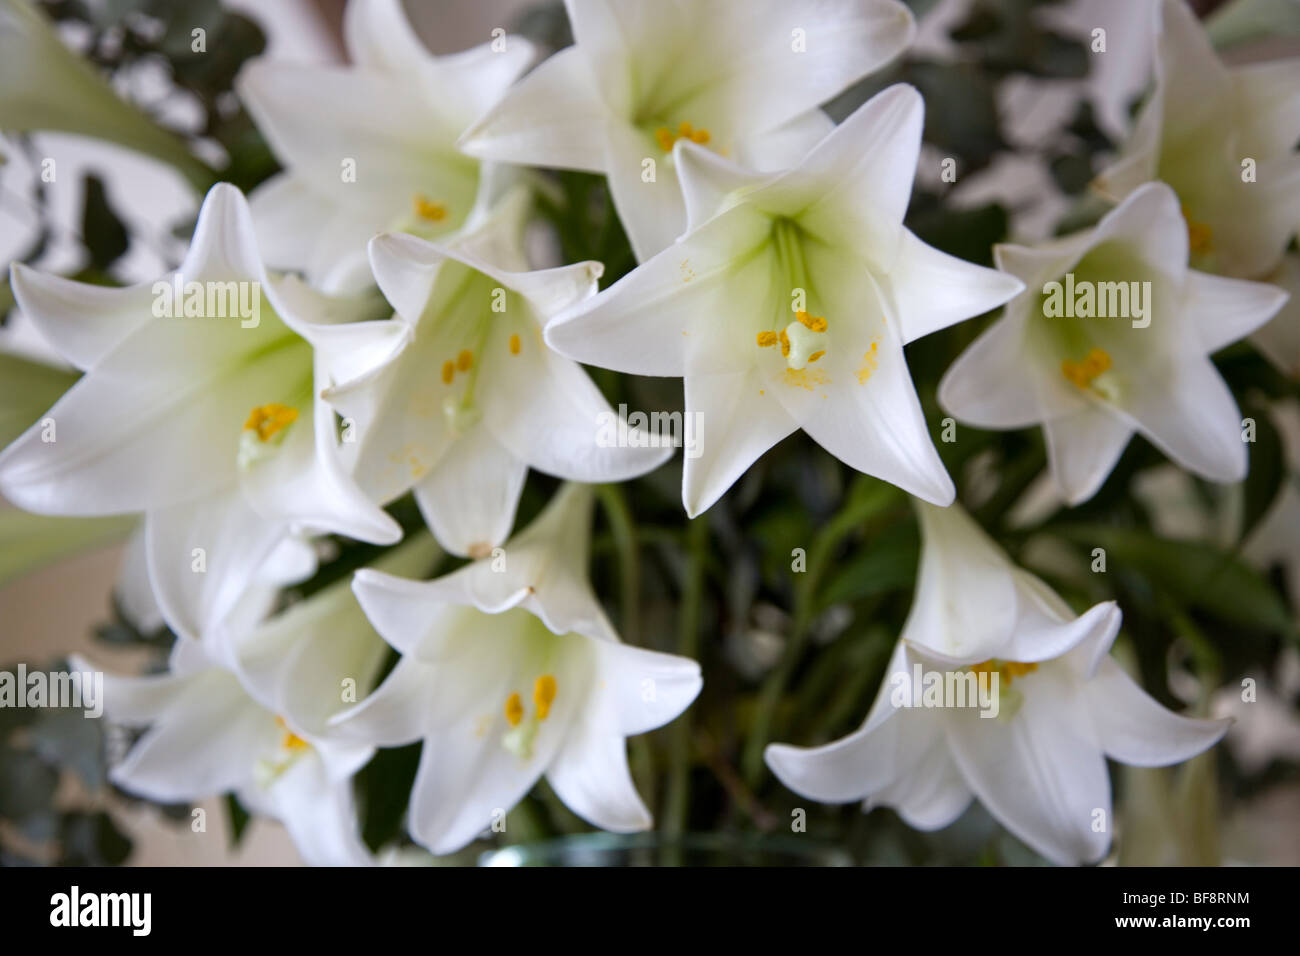 Bunch of White Easter Lilies Stock Photo